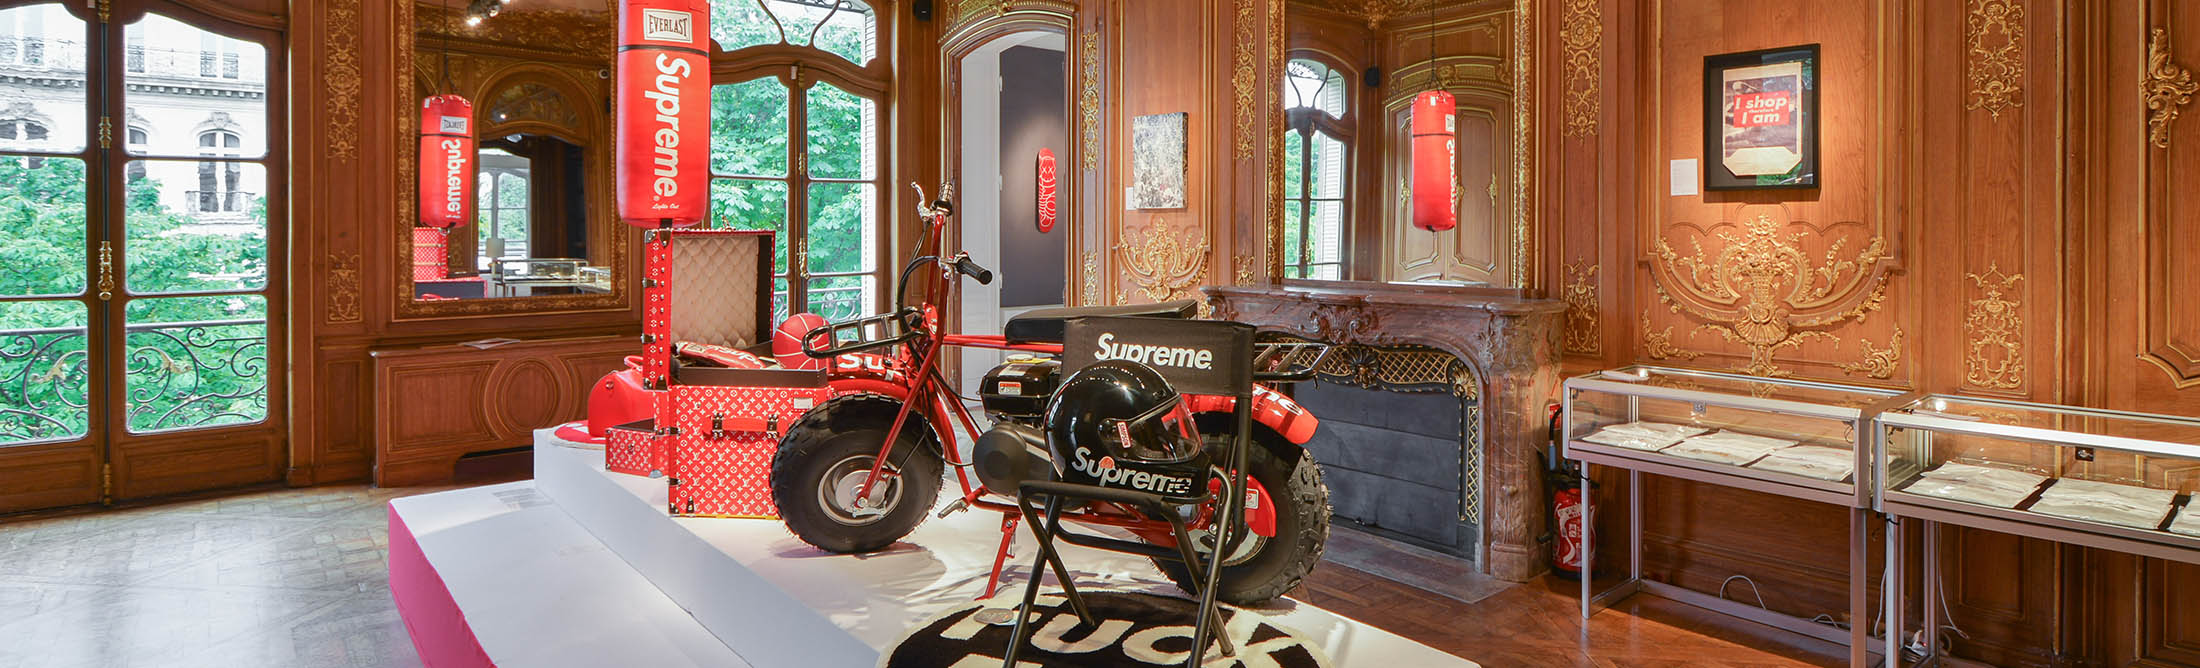 Louis Vuitton in collaboration with Supreme pop-up stores prompt